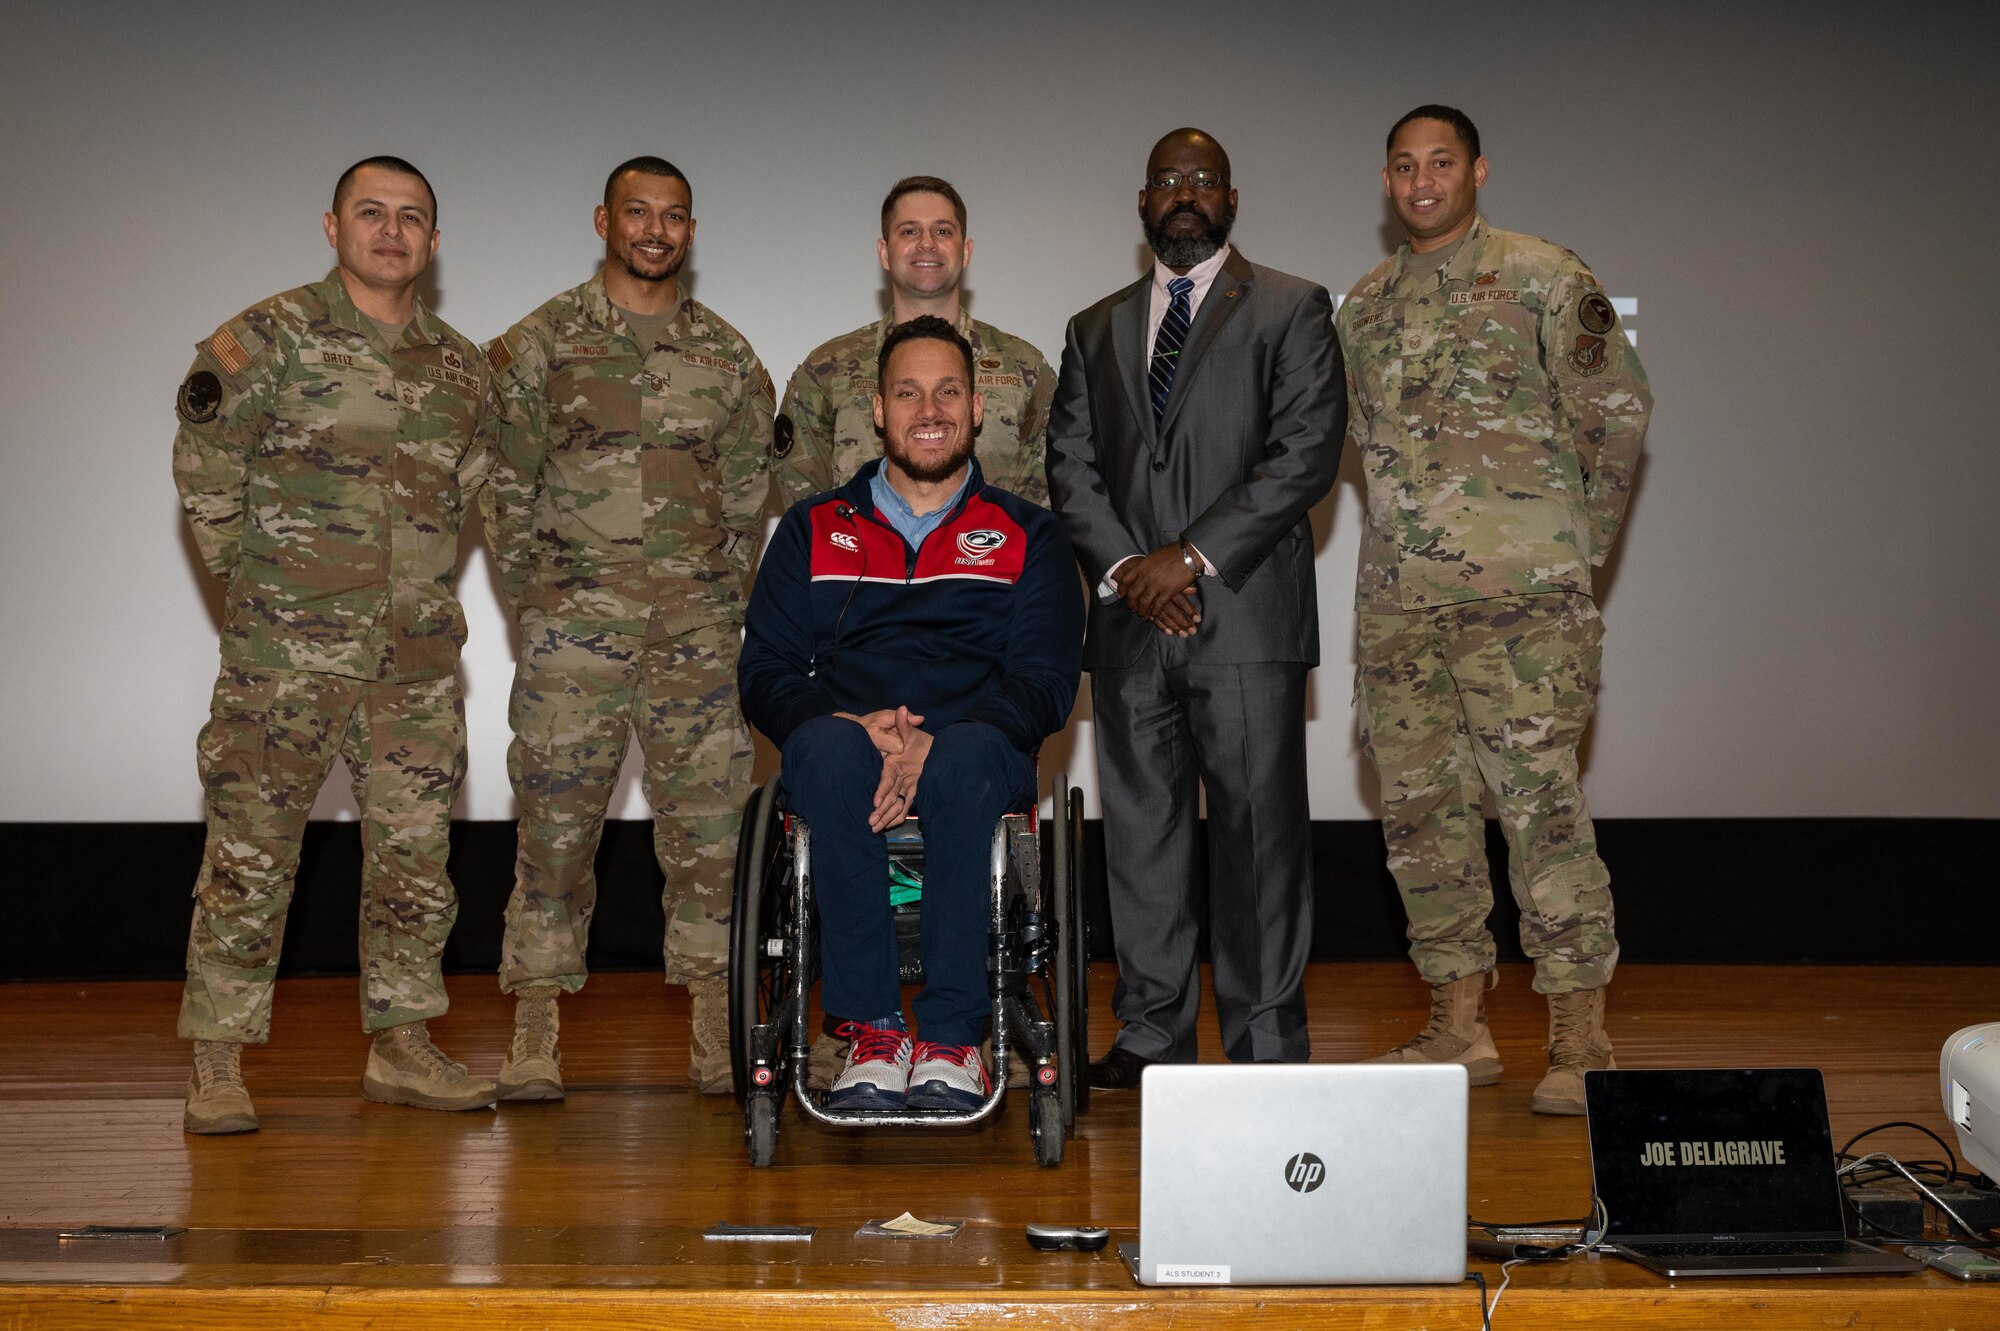 A man in a wheelchair faces the camera with five military men standing behind him